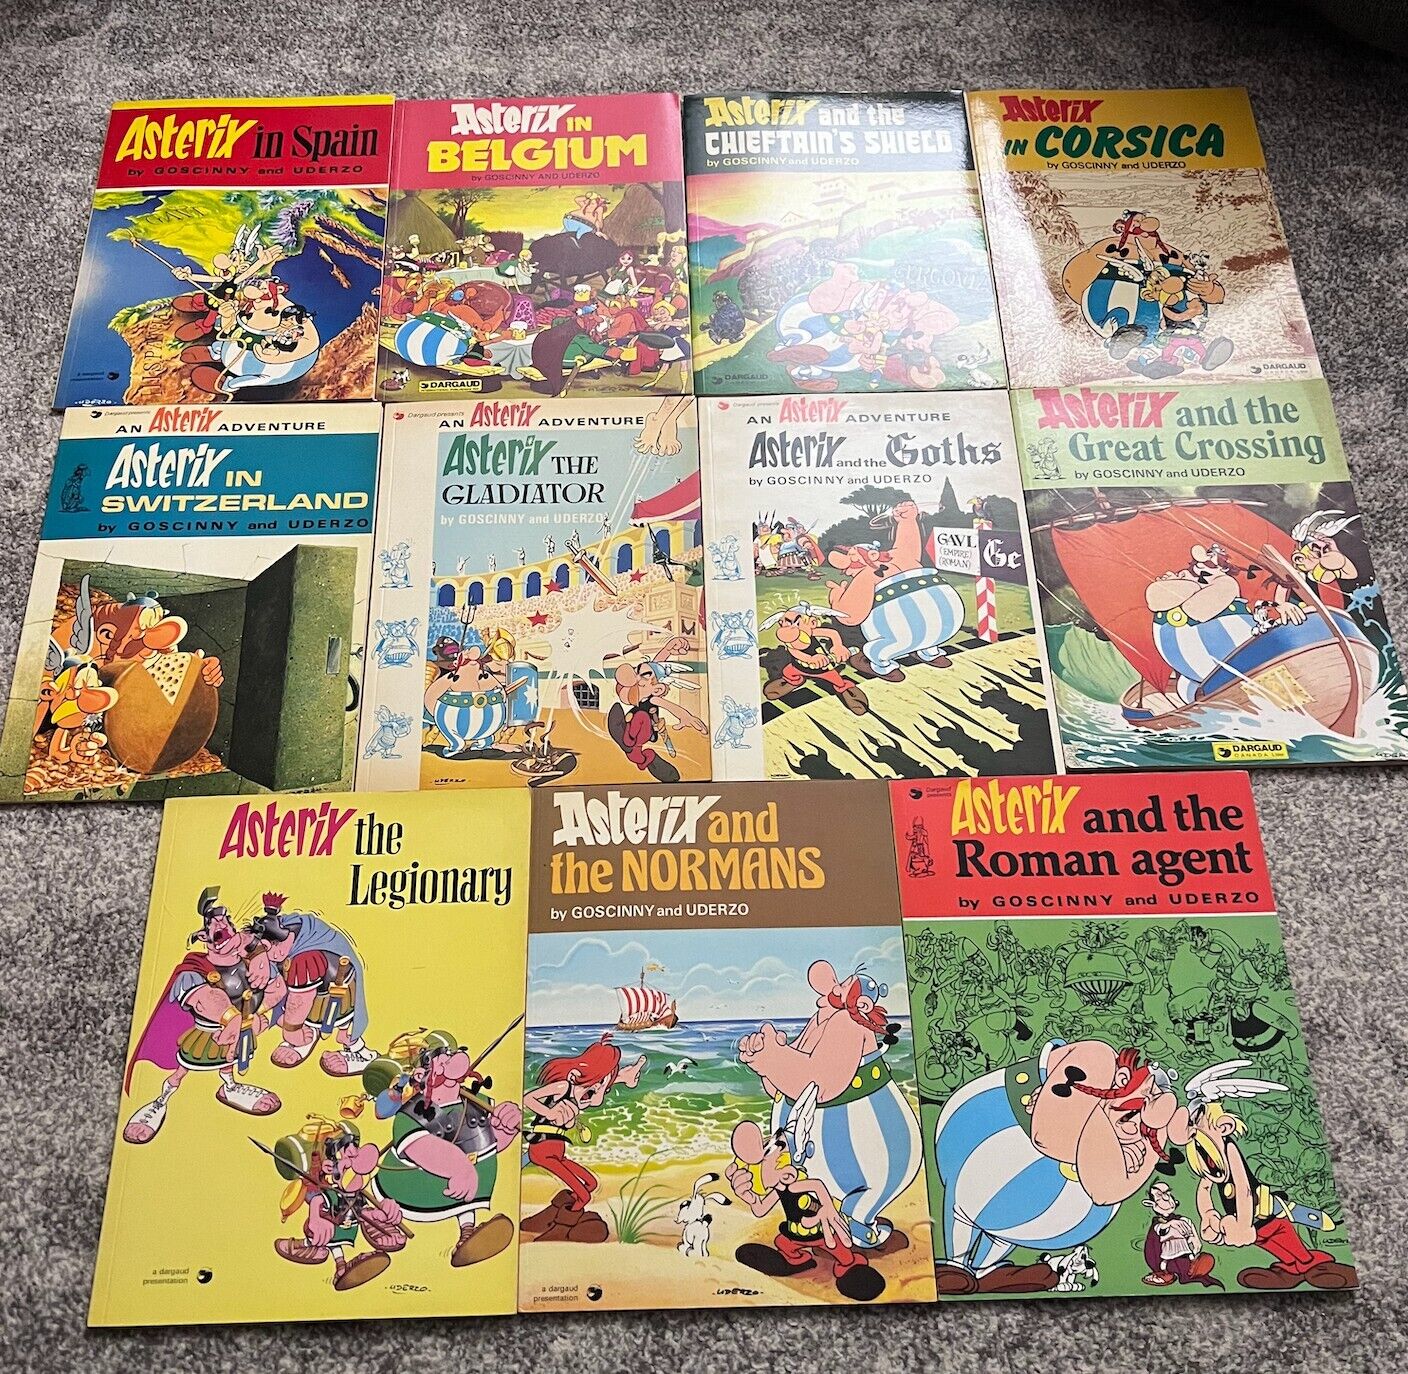 Asterix in Corsica and MANY Others (Pub. Dargaud 1980) 11 Books Total. 